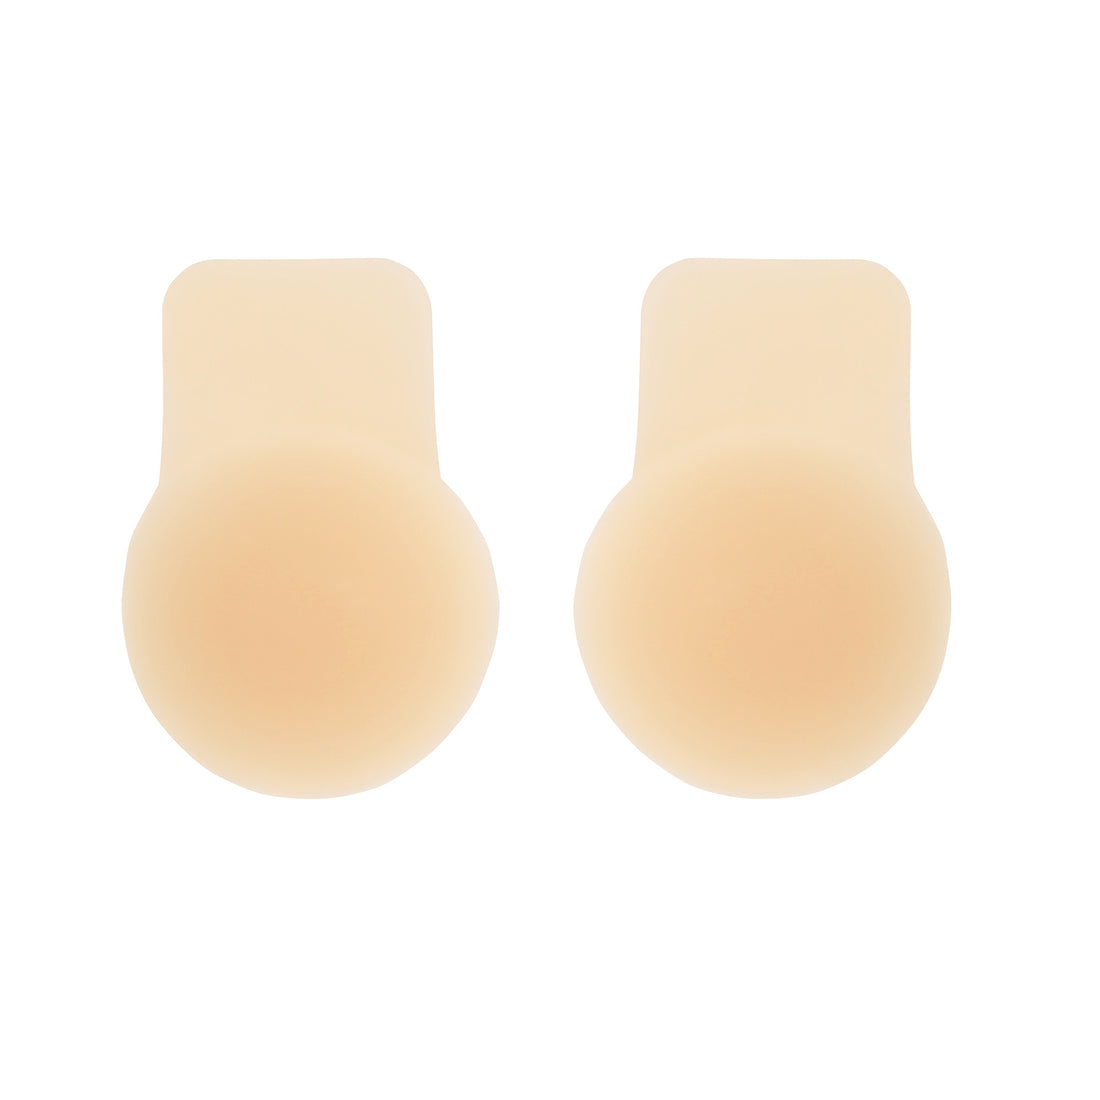 Wacoal Mood Accessories LIFTING SILICONE NIPPLE, Butt Lifting Paste, Model MM9059, Beige (BE)